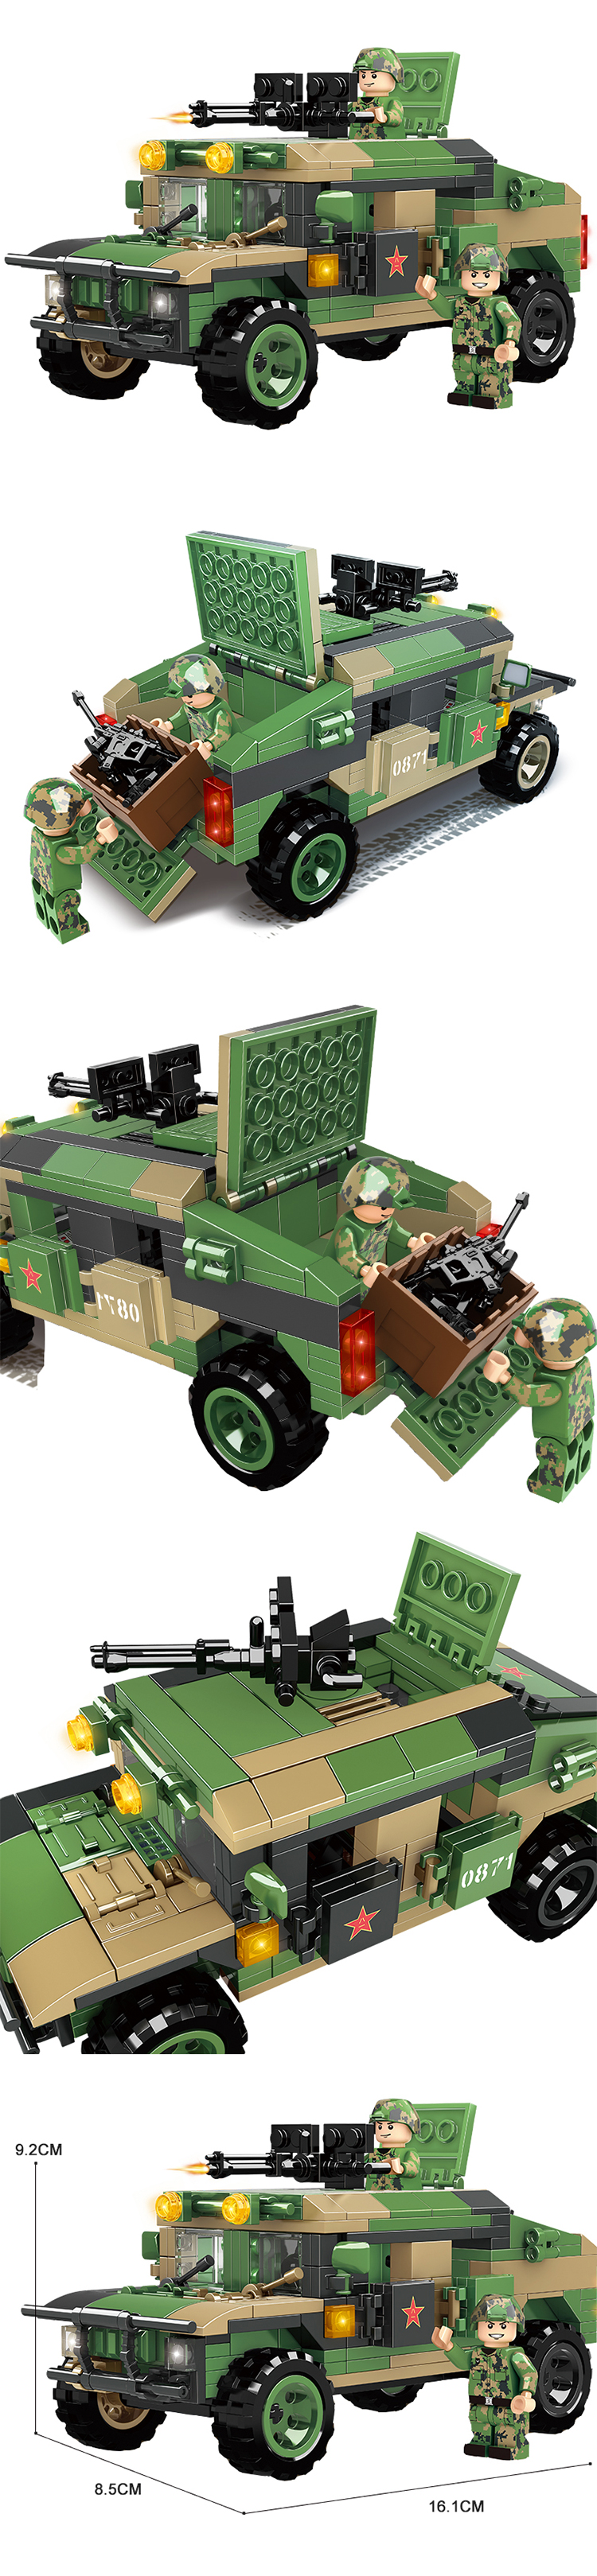 WOMA TOYS Wholesale Light Armored Army Vehicle Military Building Blocks Bricks car educational toy set jouet